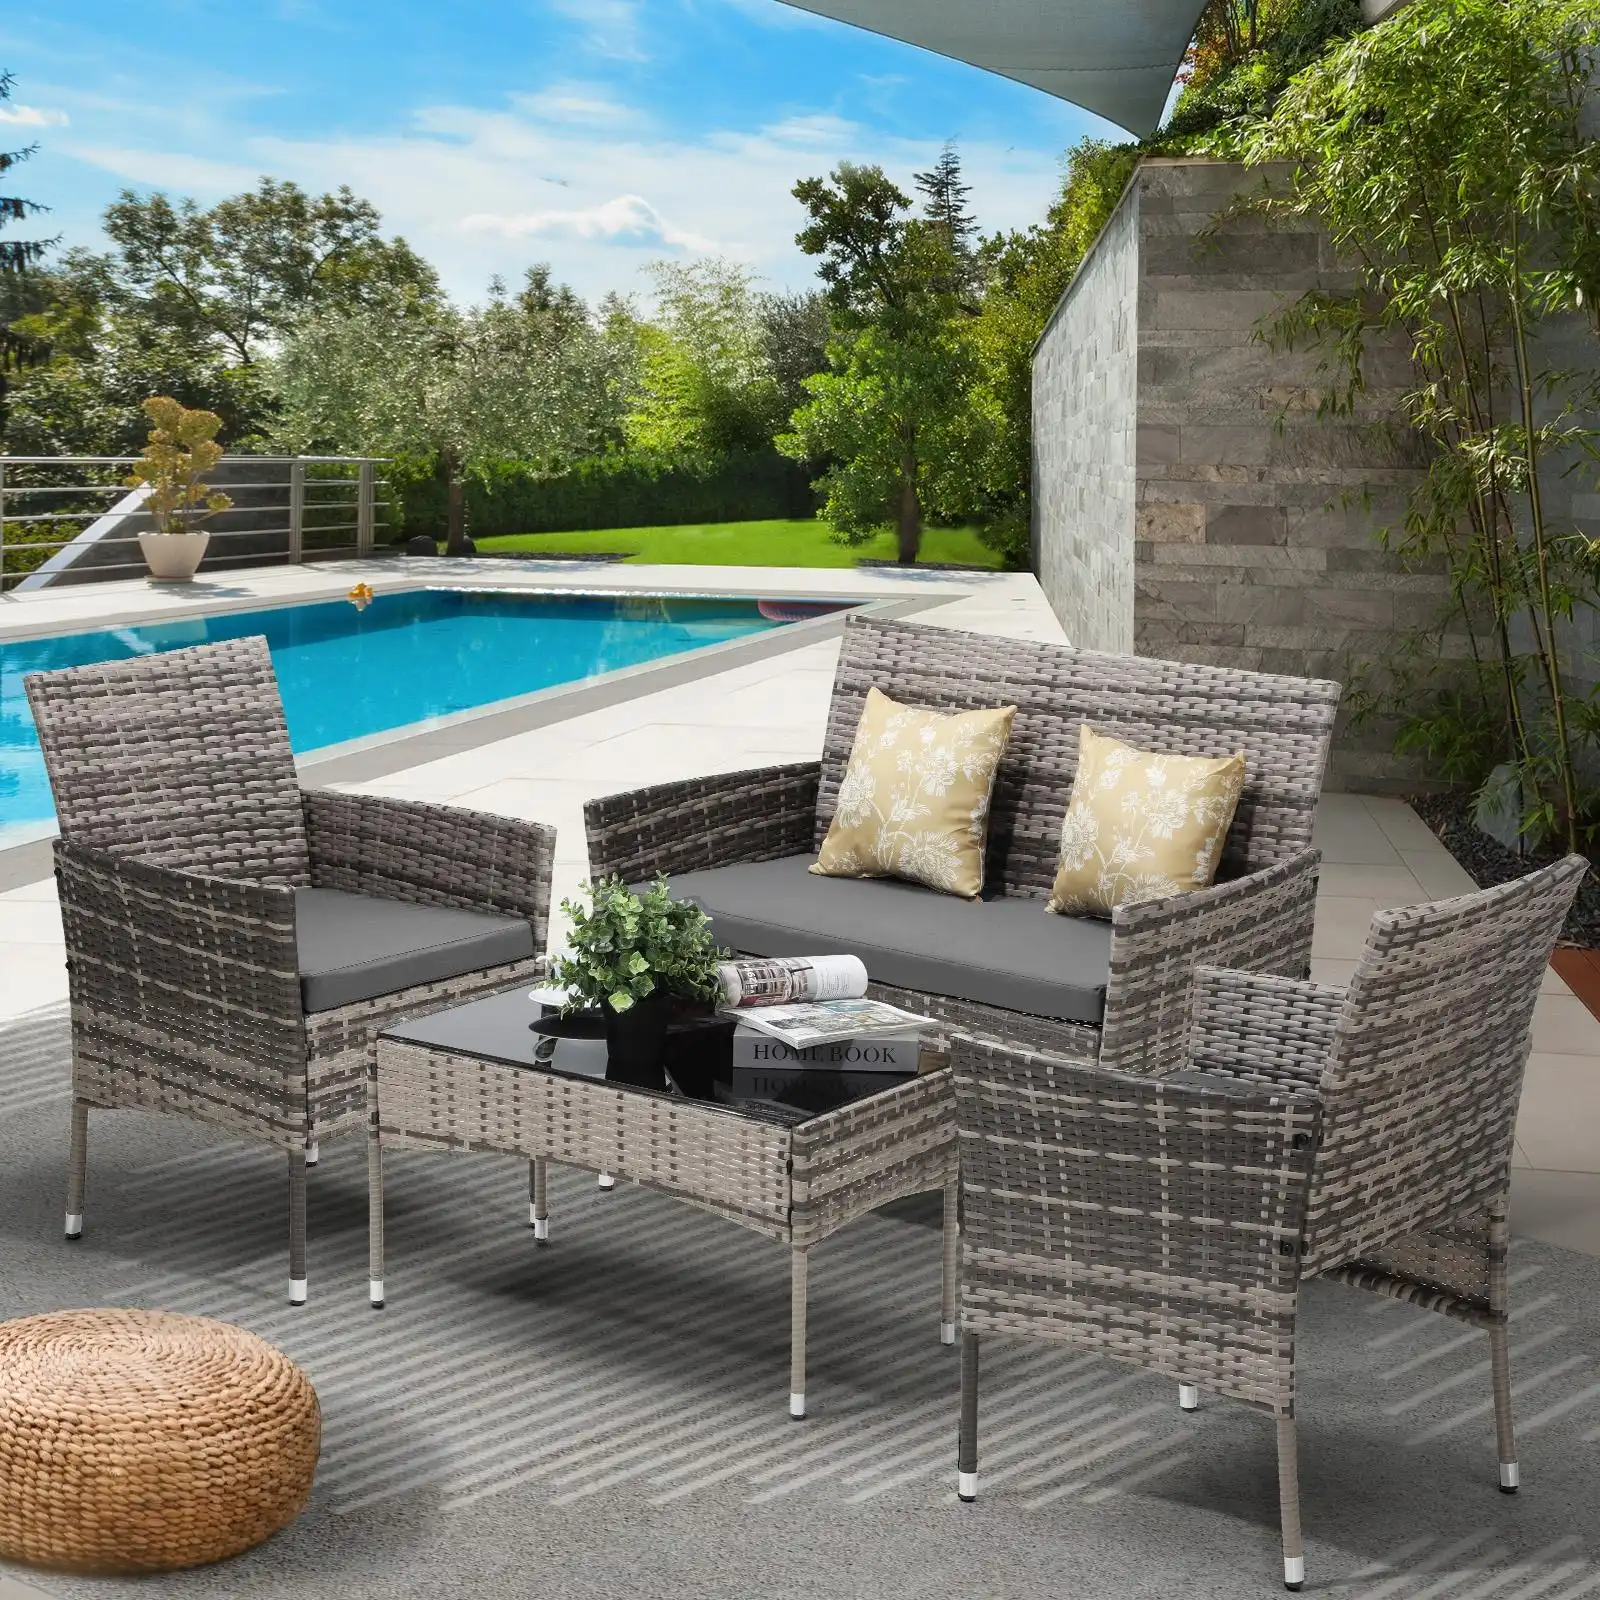 Livsip Outdoor Furniture 4-Piece Lounge Setting Chairs Table Wicker Set Patio